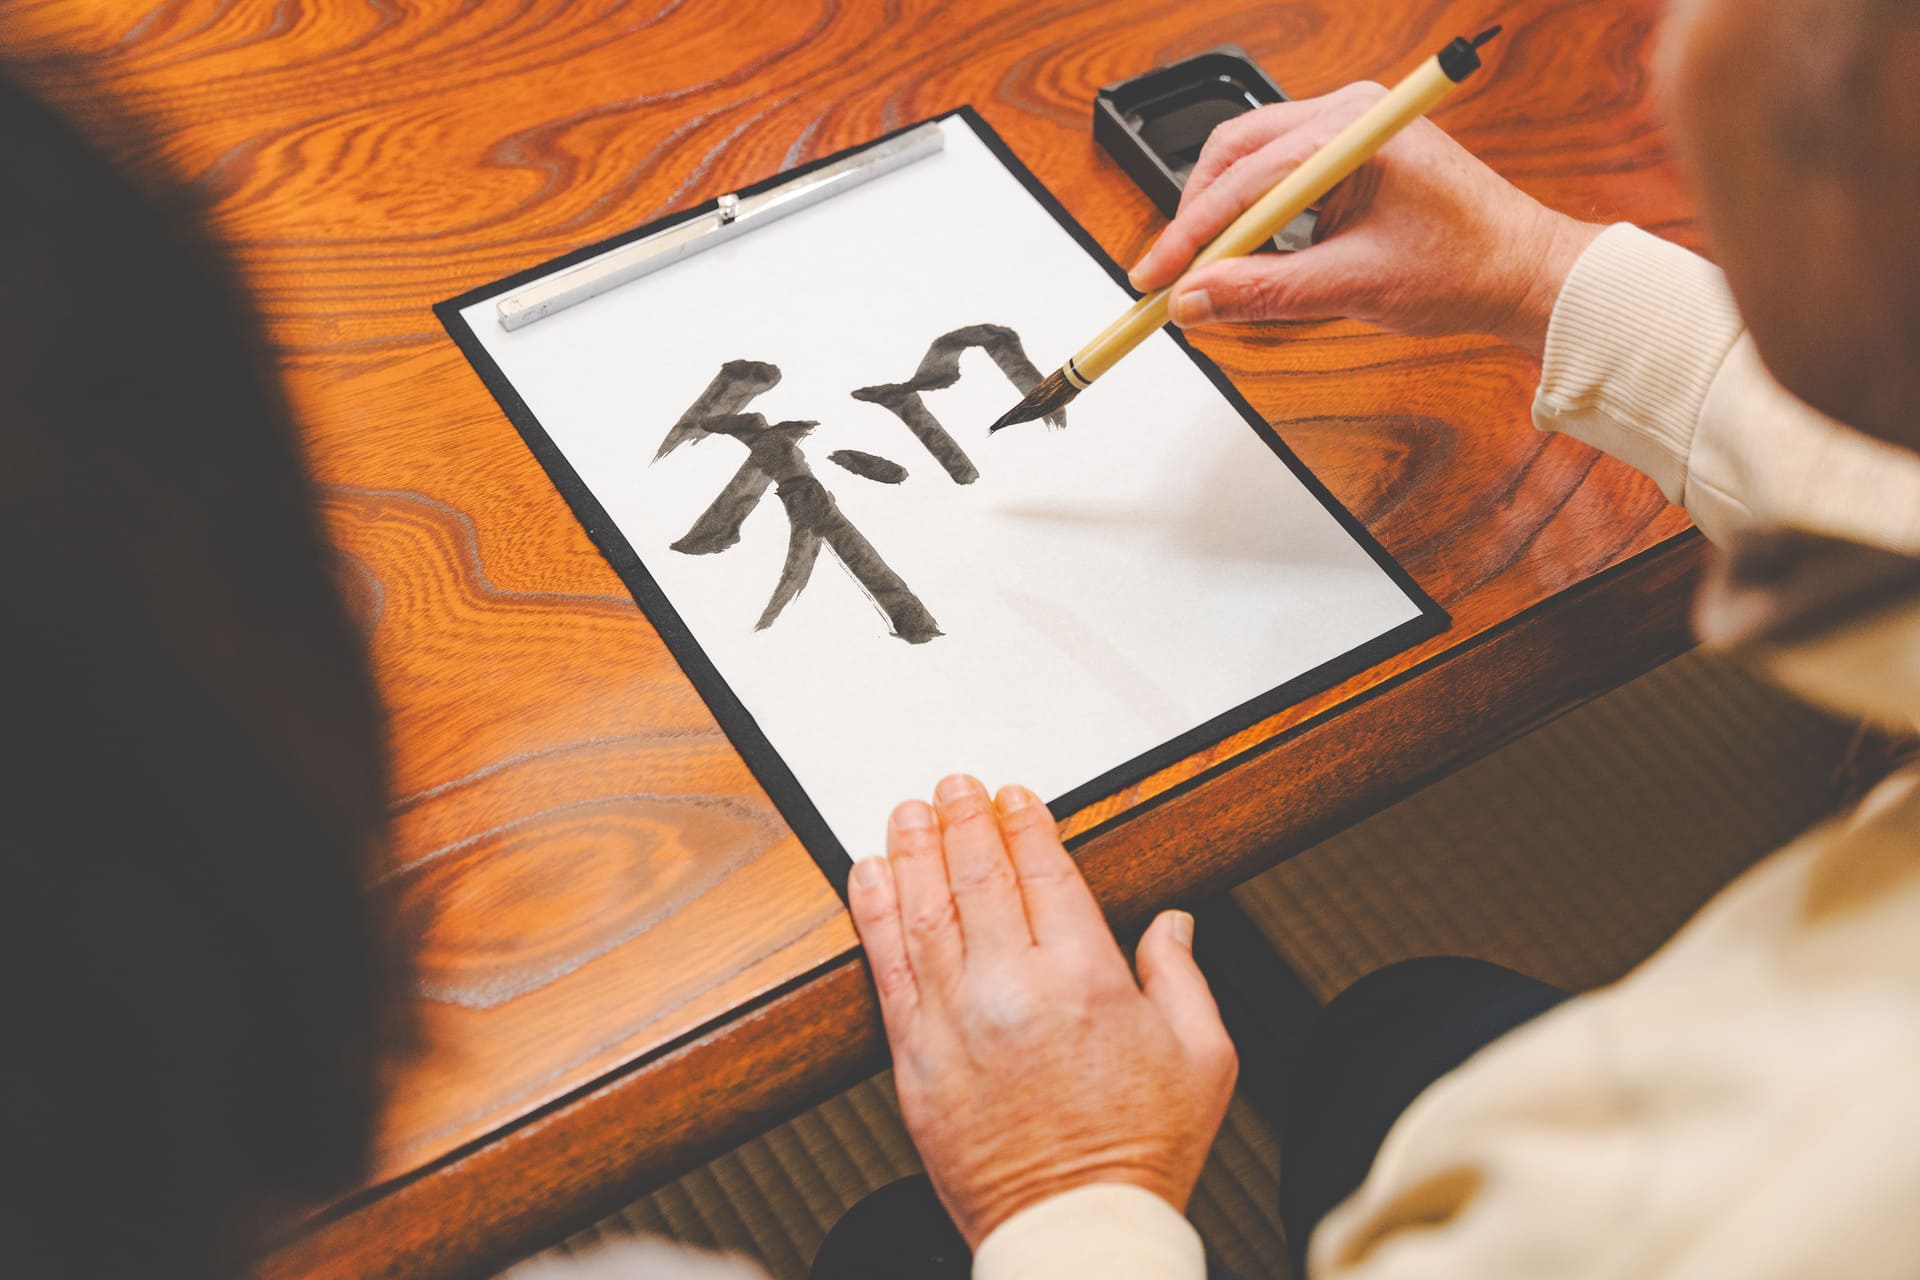 Japanese Cultural Experiences at Kyoto Abeya. Close-up of hands practicing Japanese calligraphy, focused on a white paper with the character '和' written with a calligraphy brush.